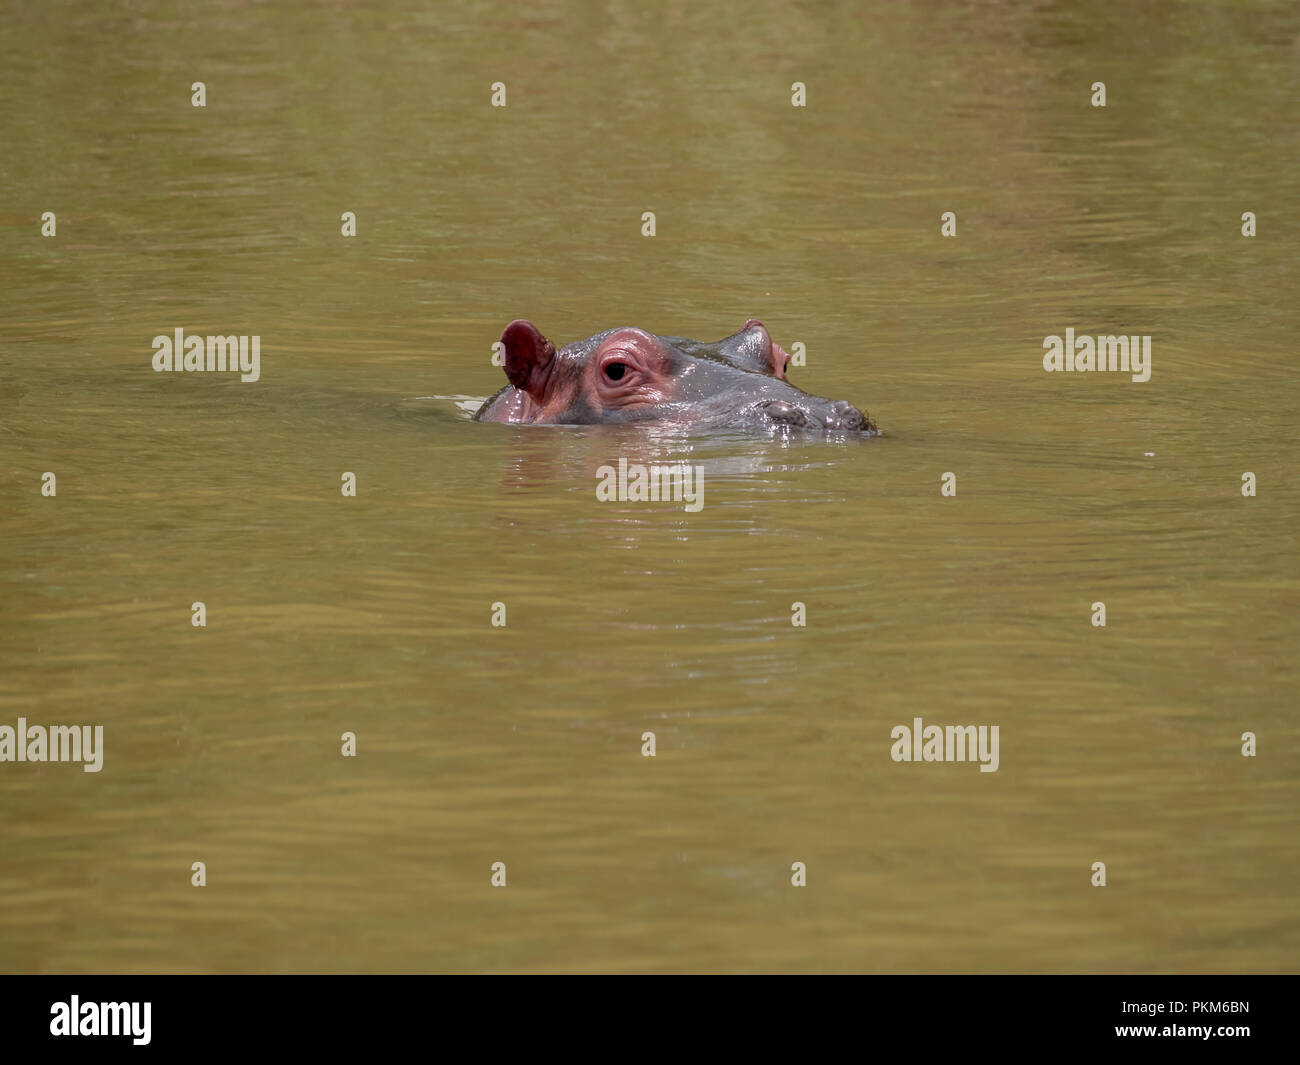 A lone hippo,(hippopotamus) swimming in South Africa. Stock Photo